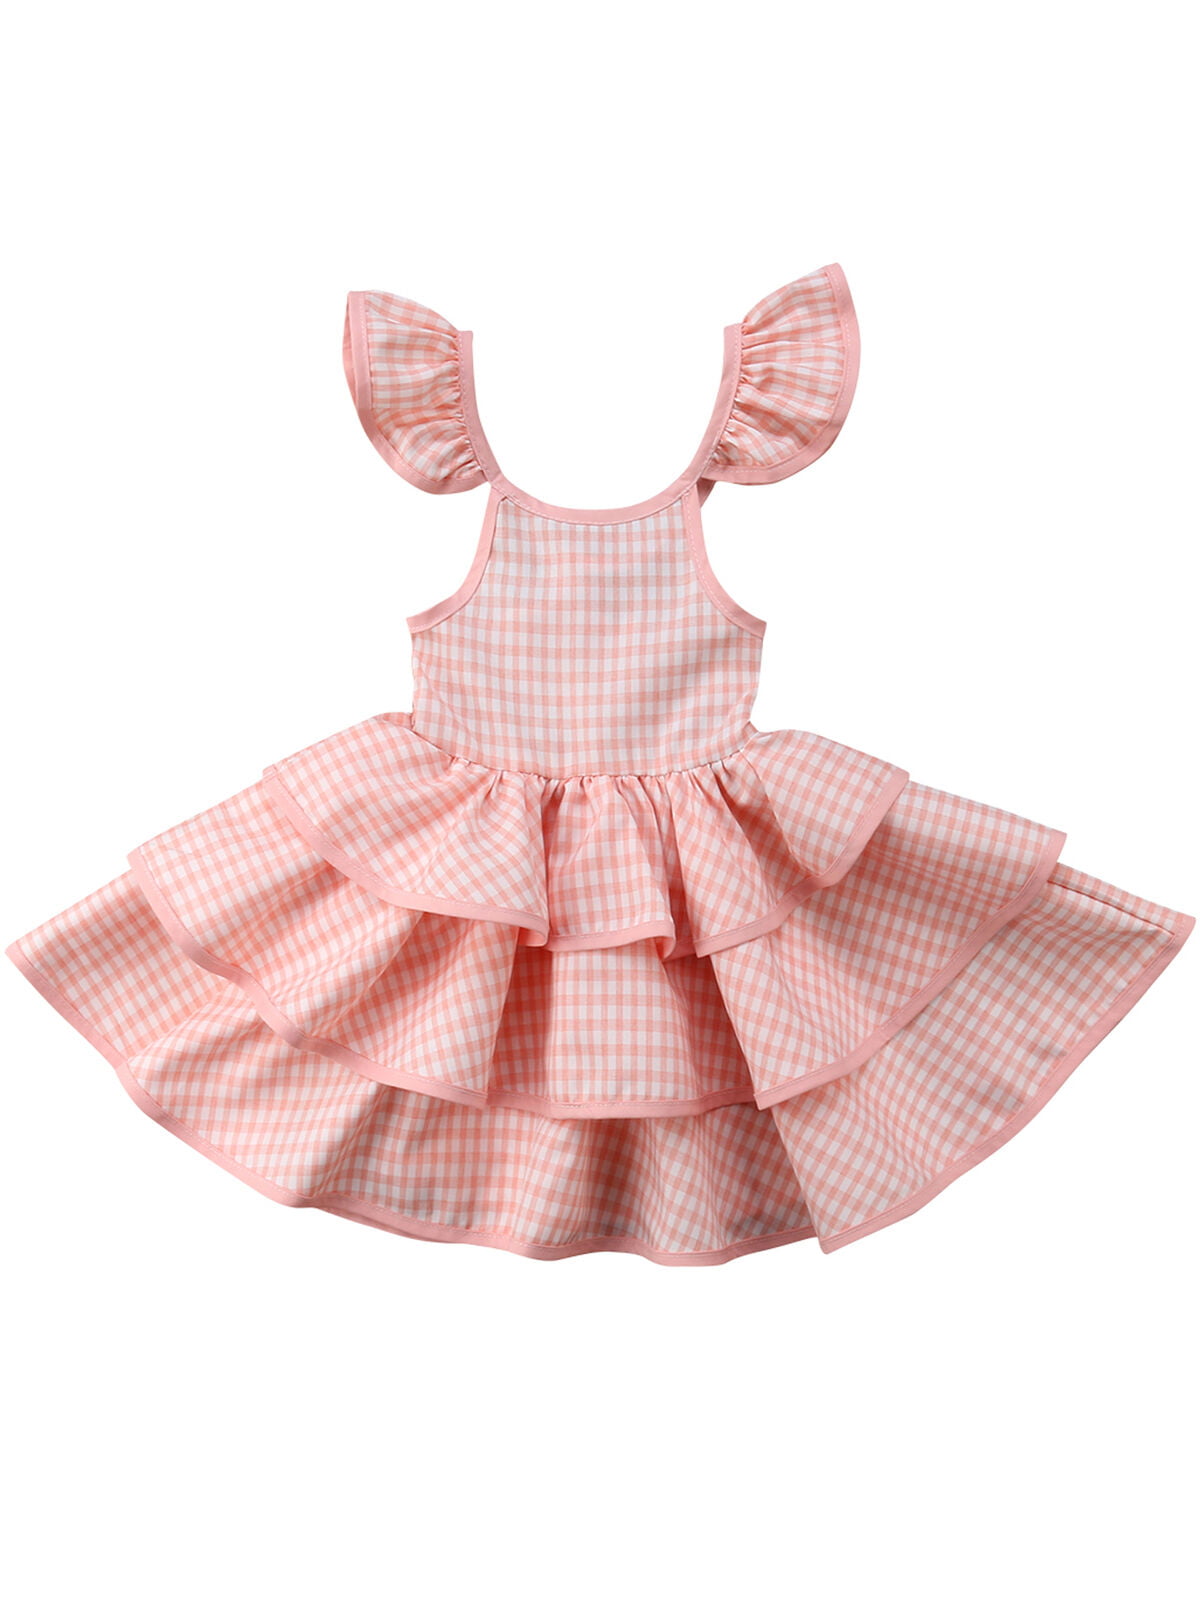 Baby Girls Plaid Floral Dress Clothes Ruffle Sleeve Tutu Skirt Backless Halter Sundress Birthday Party Princess Formal Outfit 